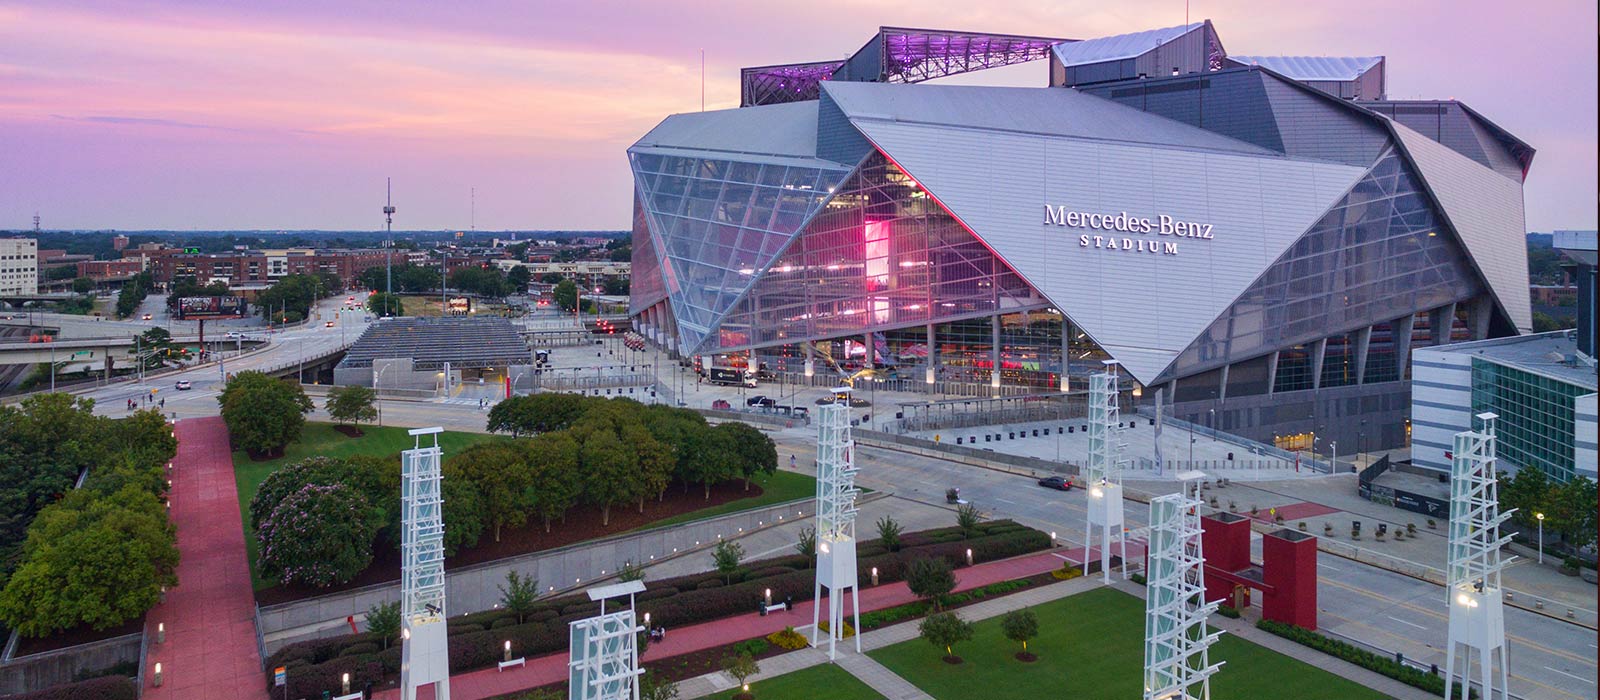 View of Mercedes-Benz Stadium with a beautiful purple sky